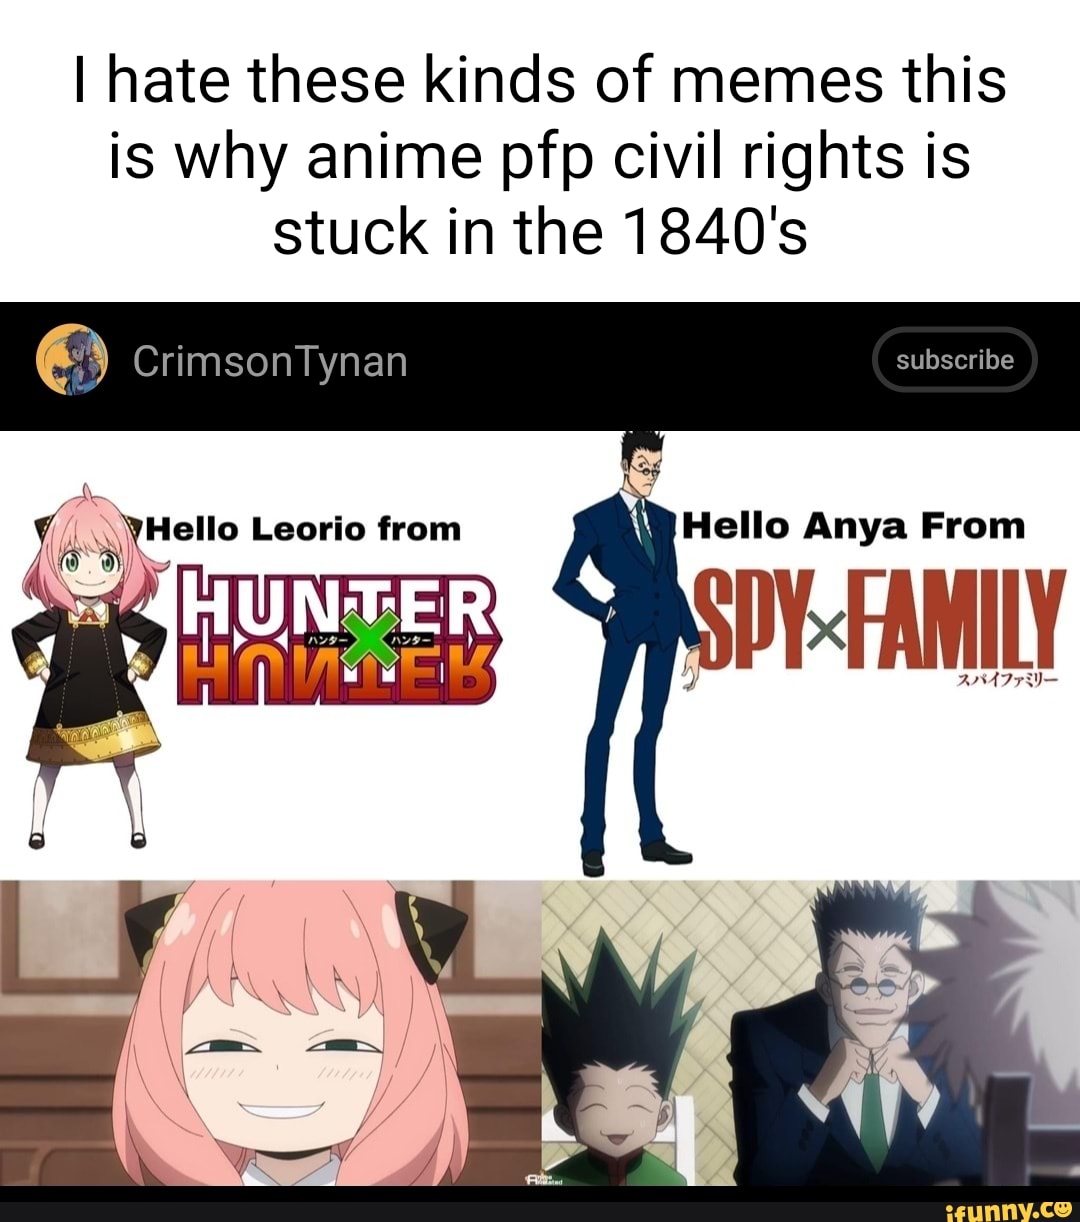 I hate these kinds of memes this is why anime pfp civil rights is stuck in  the 1840s CrimsonTynan subscribe Hello Anya From SY FAMILY Hello Leorio  from HUNTER  iFunny Brazil